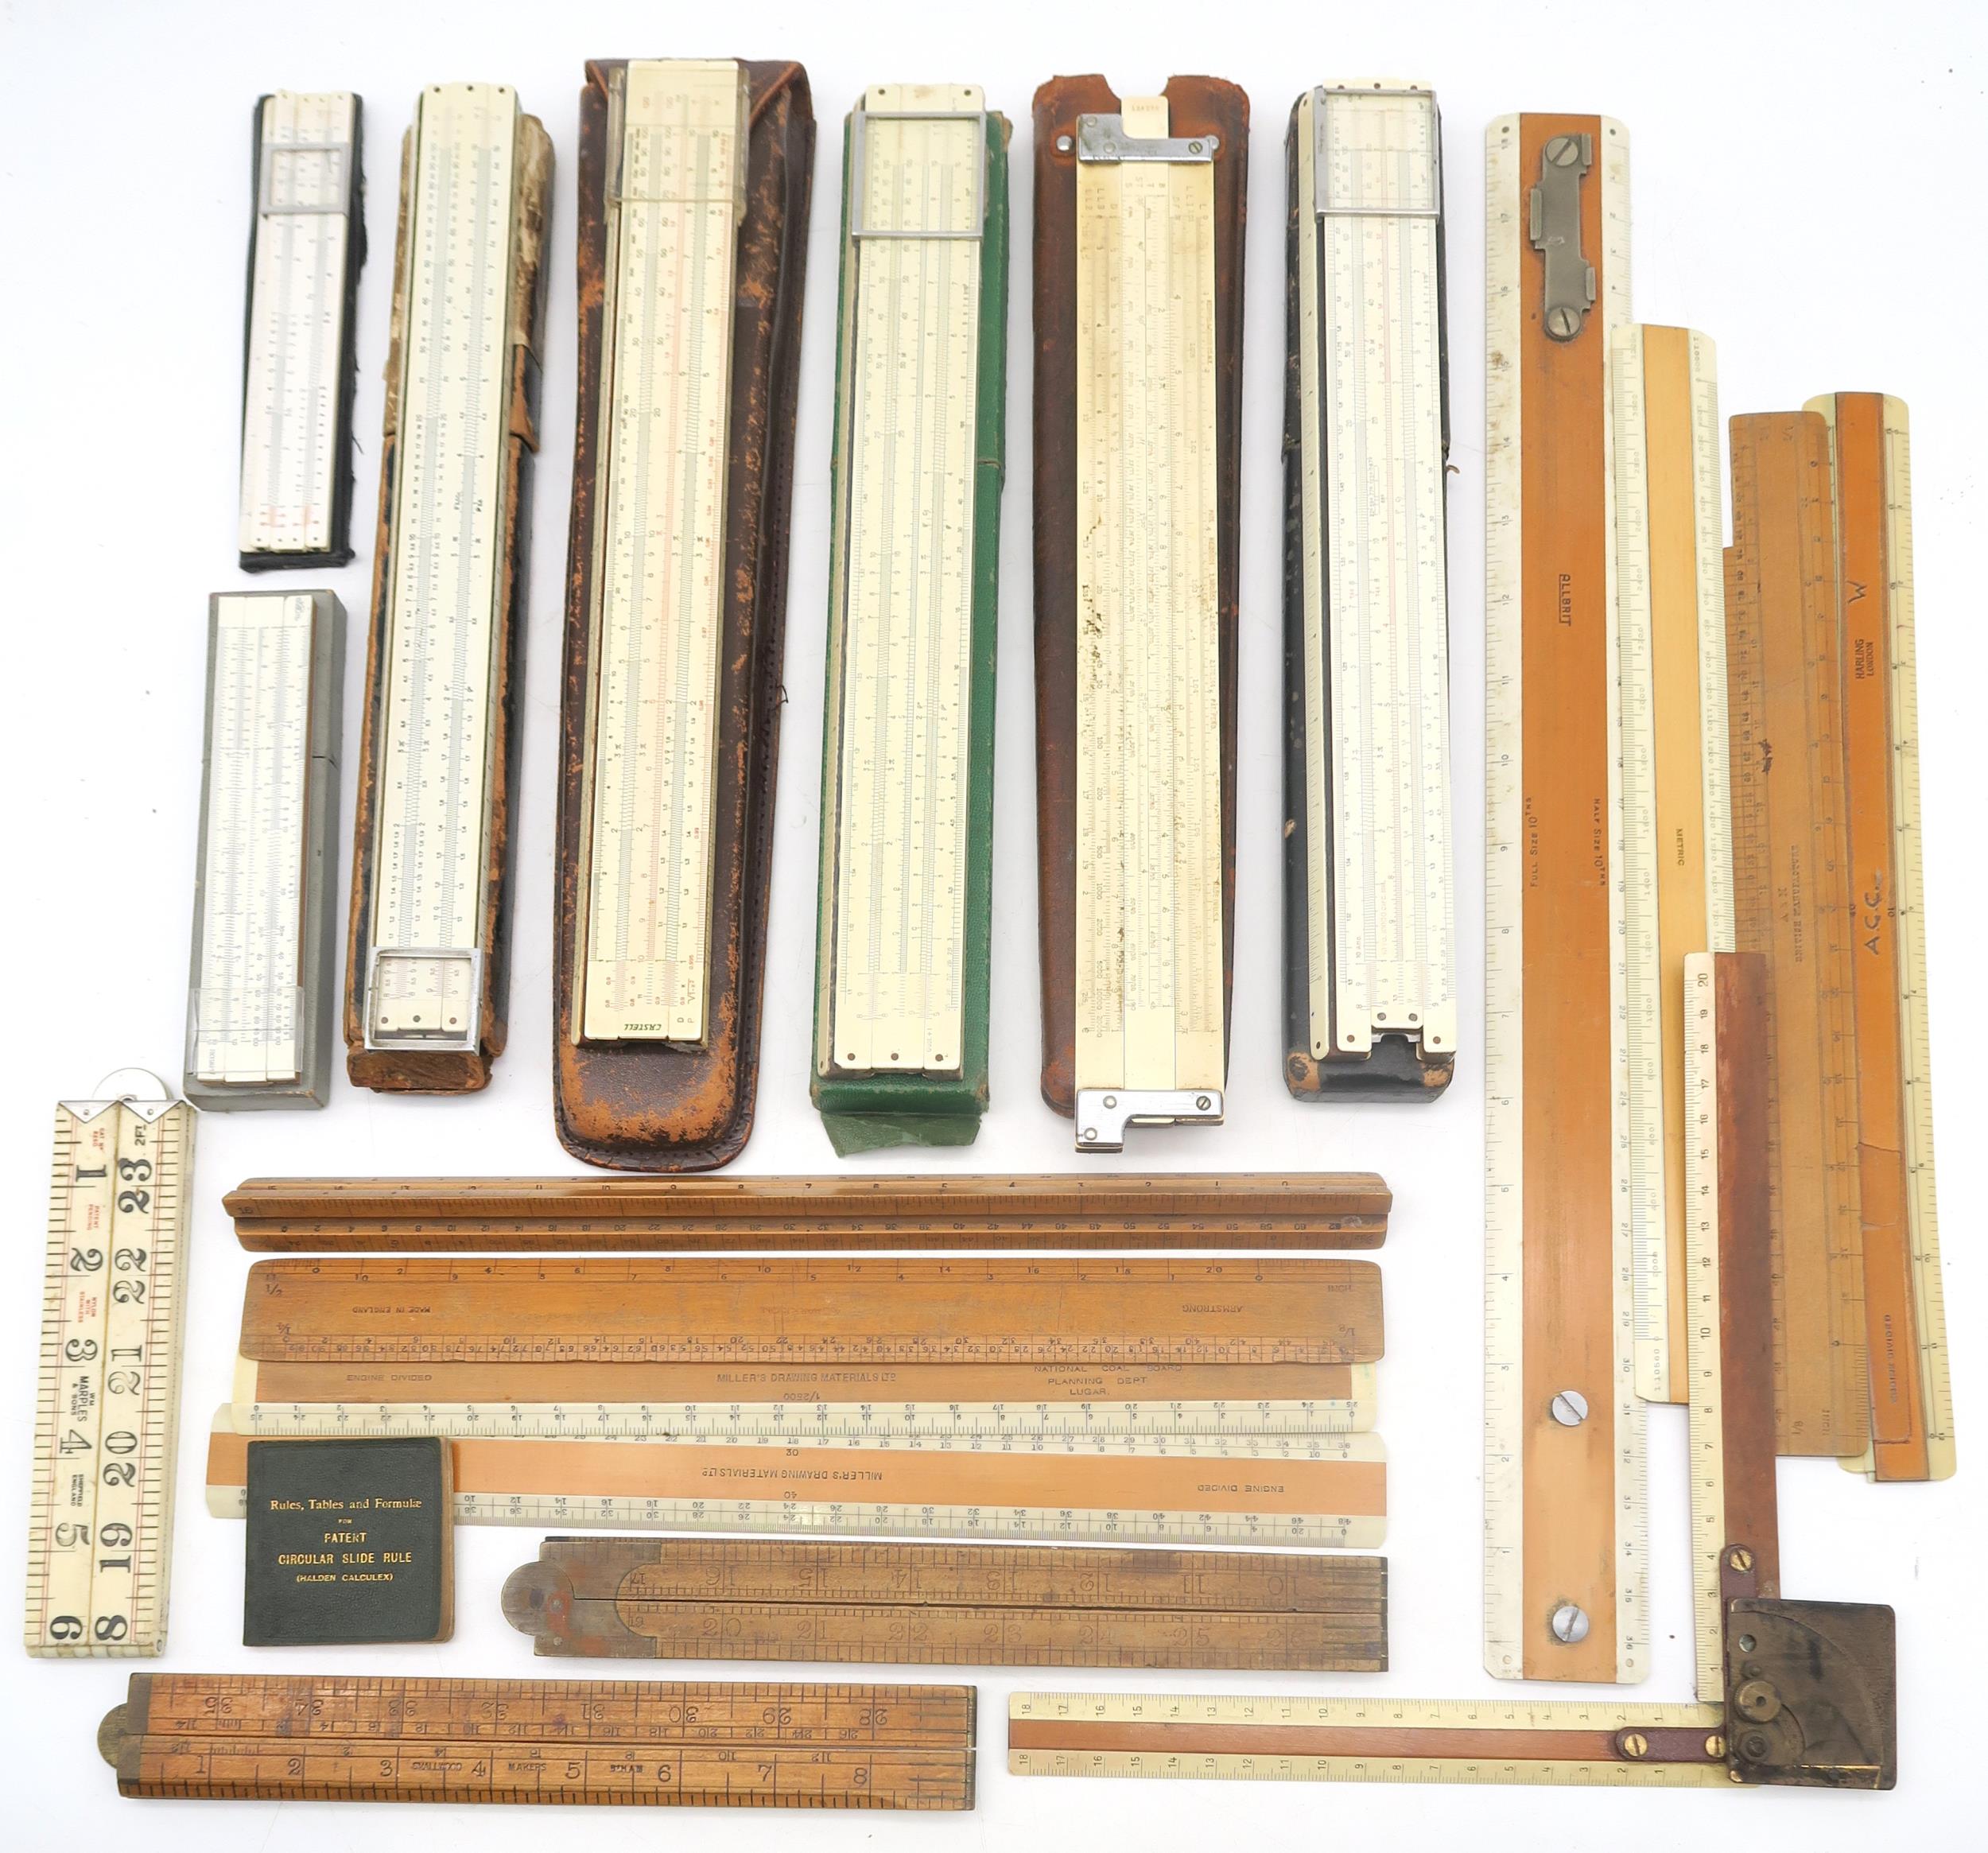 A Sikes Hydrometer retailed by J. Lizars, Glasgow & Edinburgh, assorted cased weights, various - Image 3 of 3